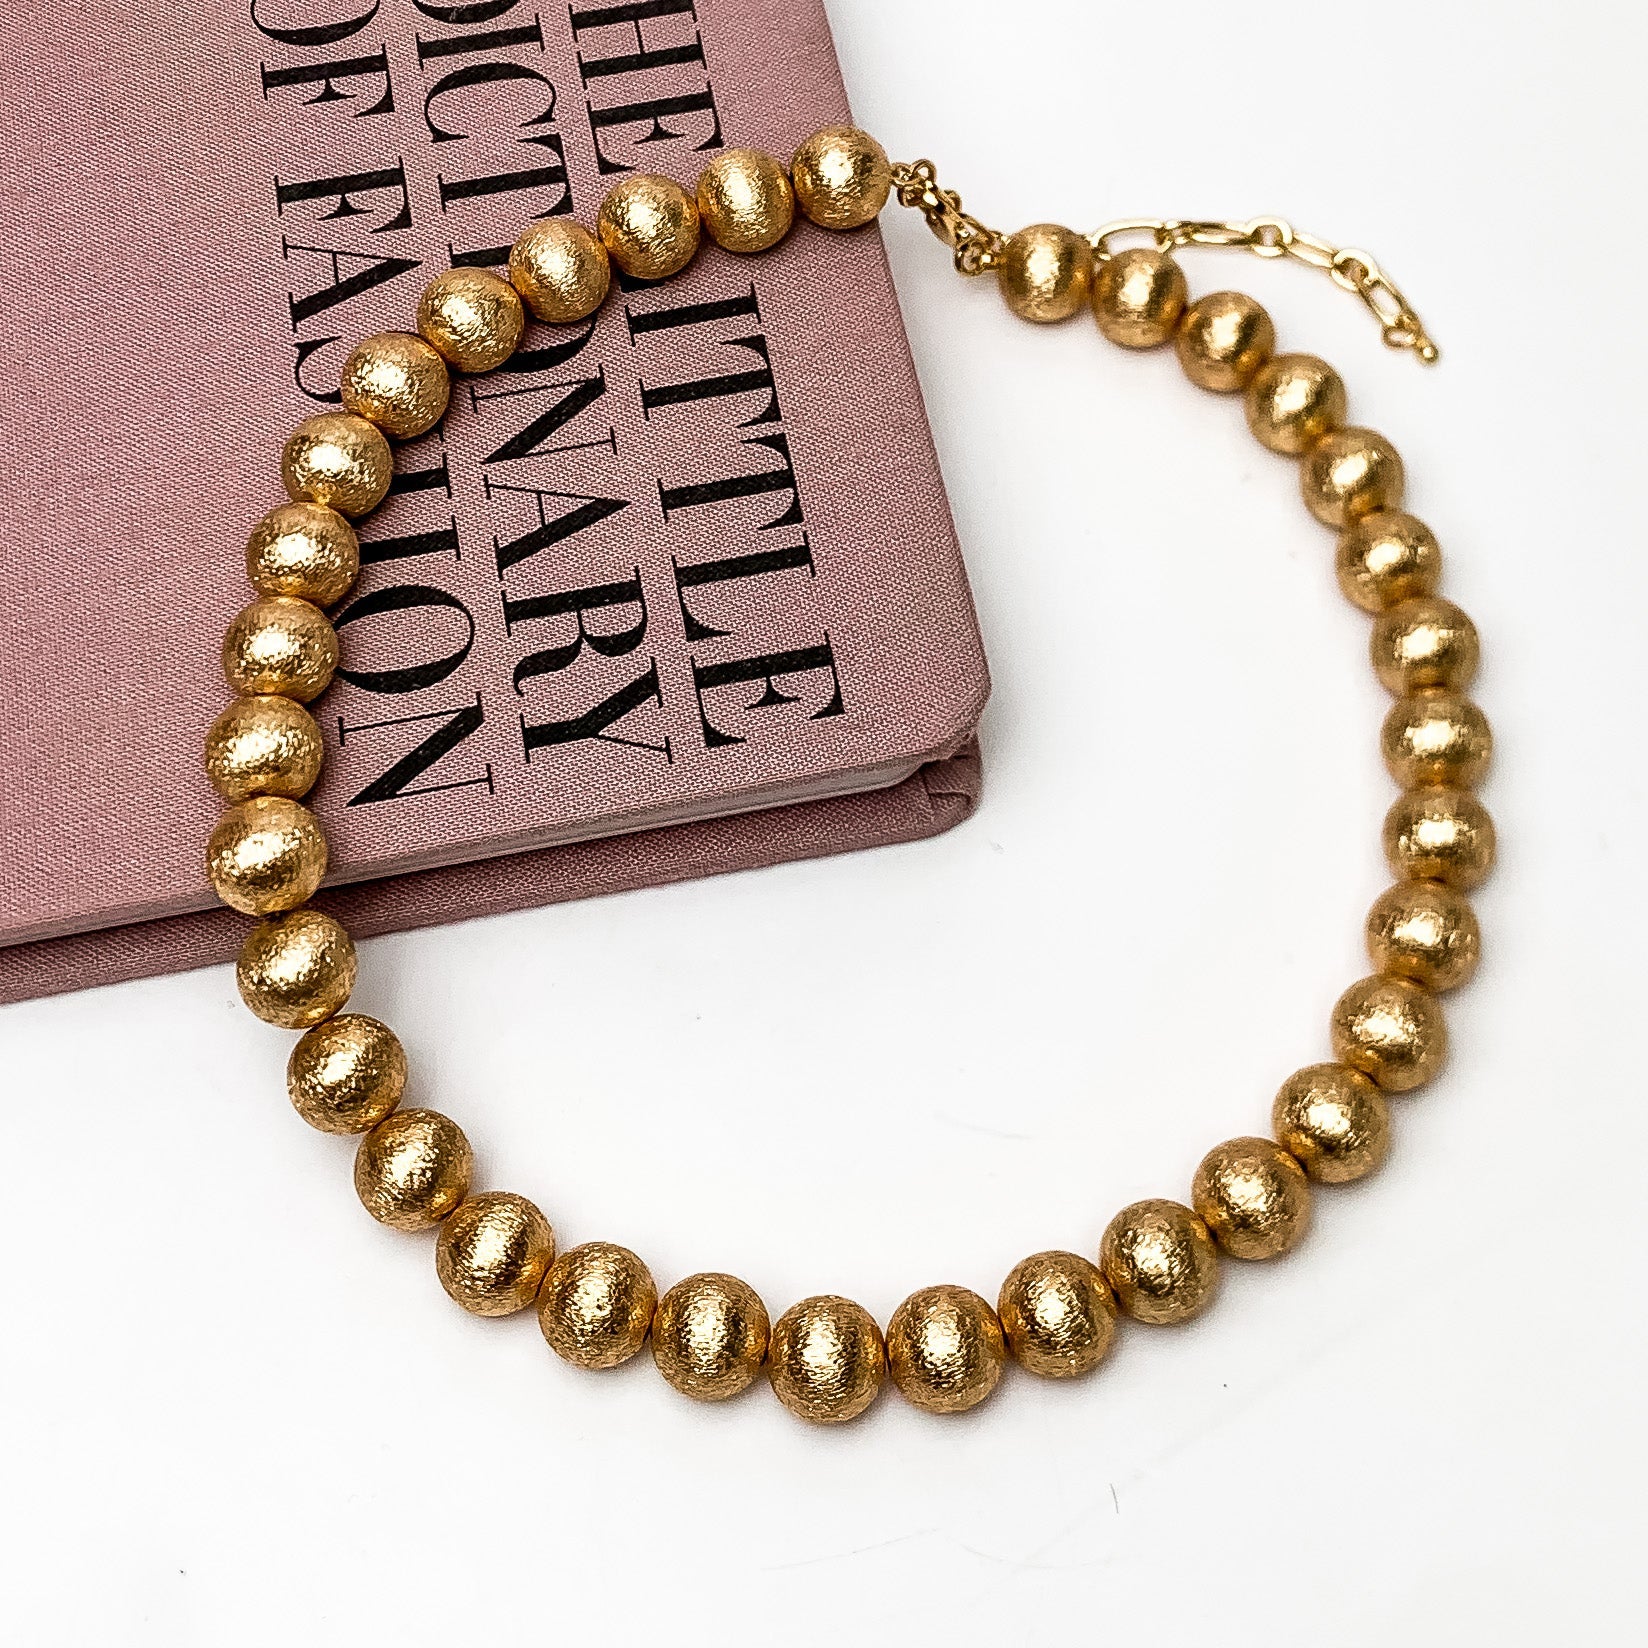 Smaller gold tone beaded necklace. Shiny gold coloring. This necklace is on a pink book with a white background.